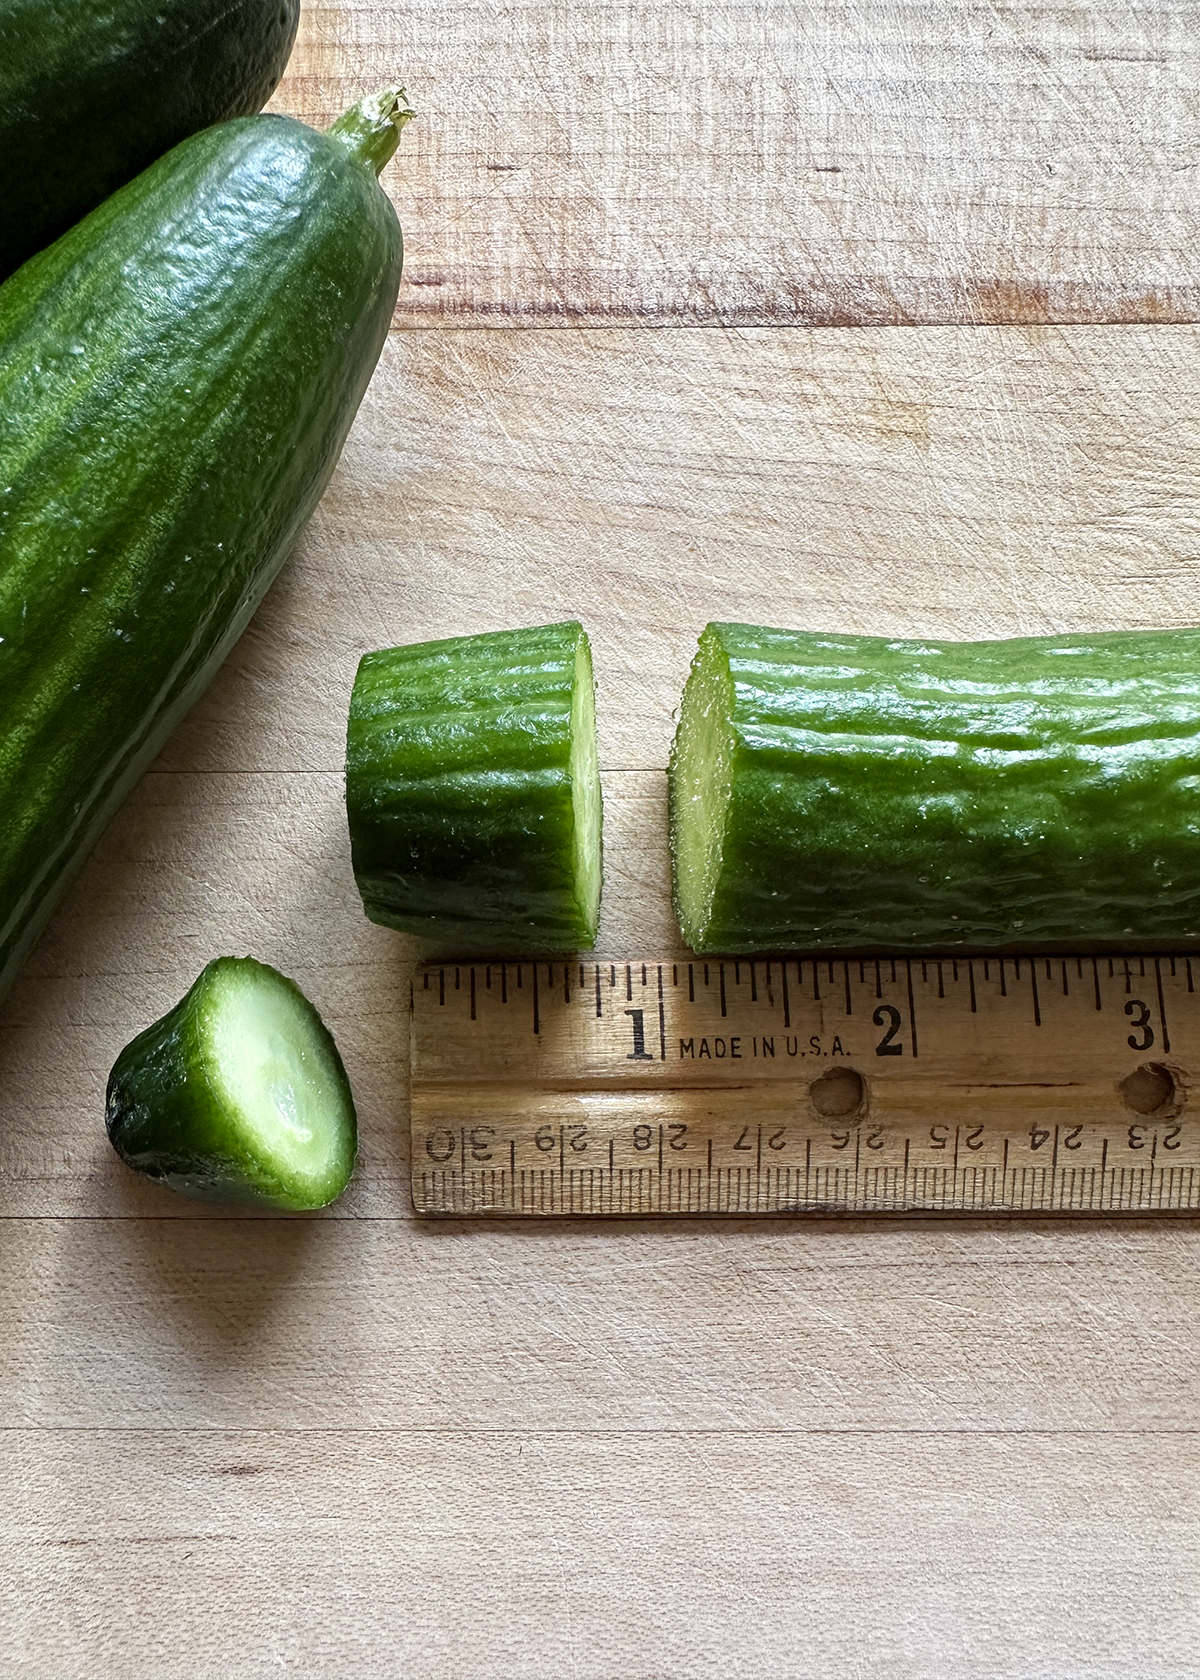 slicing cucumbers ¾-inch thick next to ruler